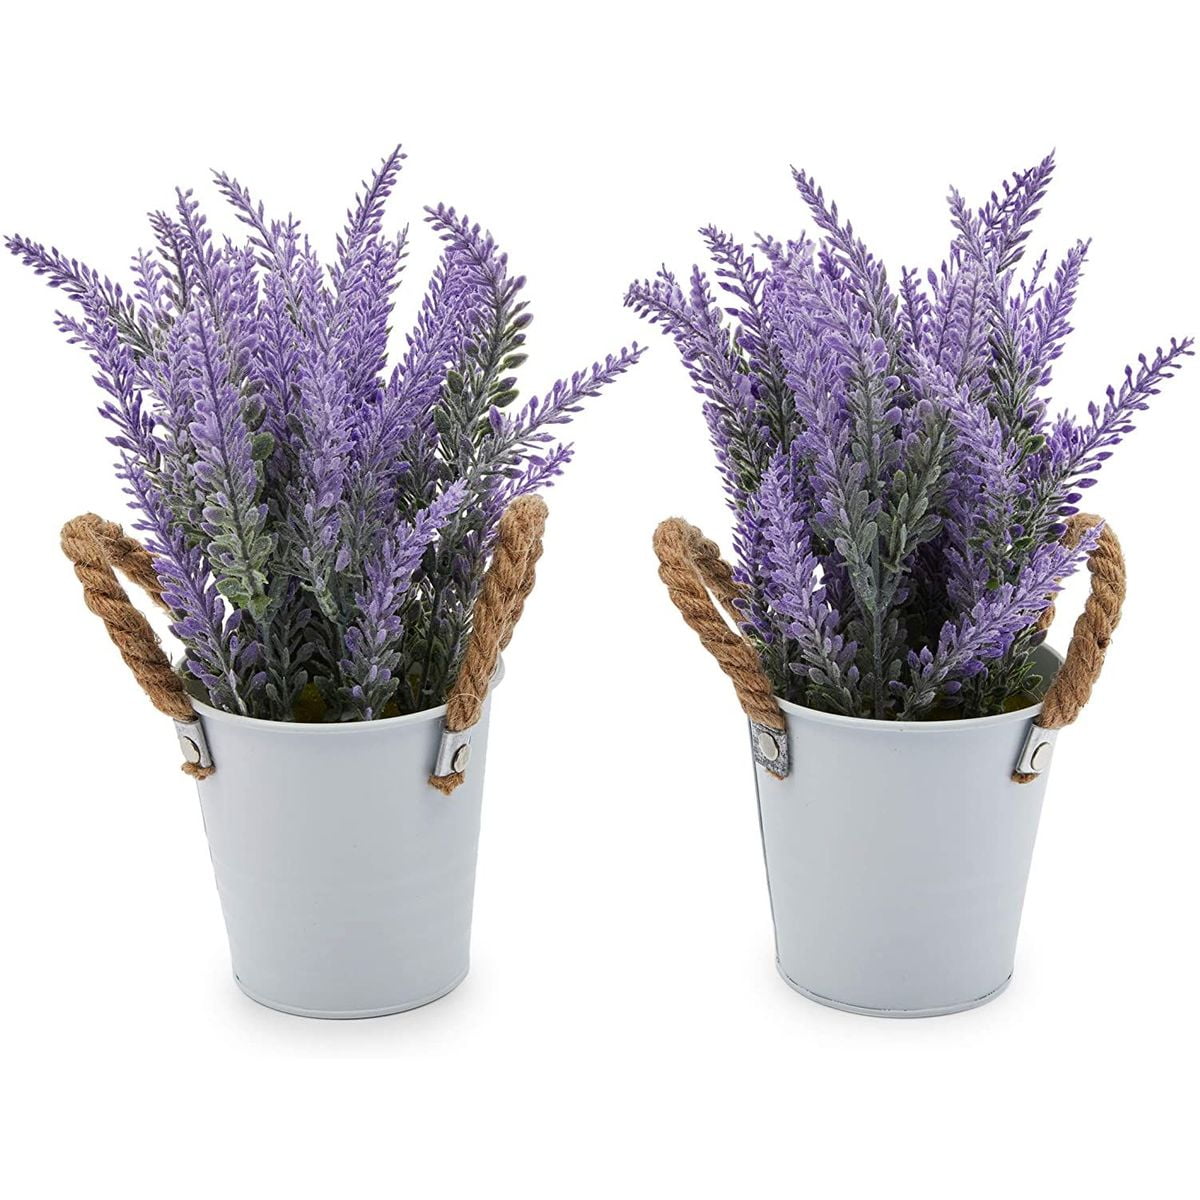 Fake Lavender Plants for Home Decor Okuna Outpost Artificial Potted Flowers 9 in, 2 Pack 